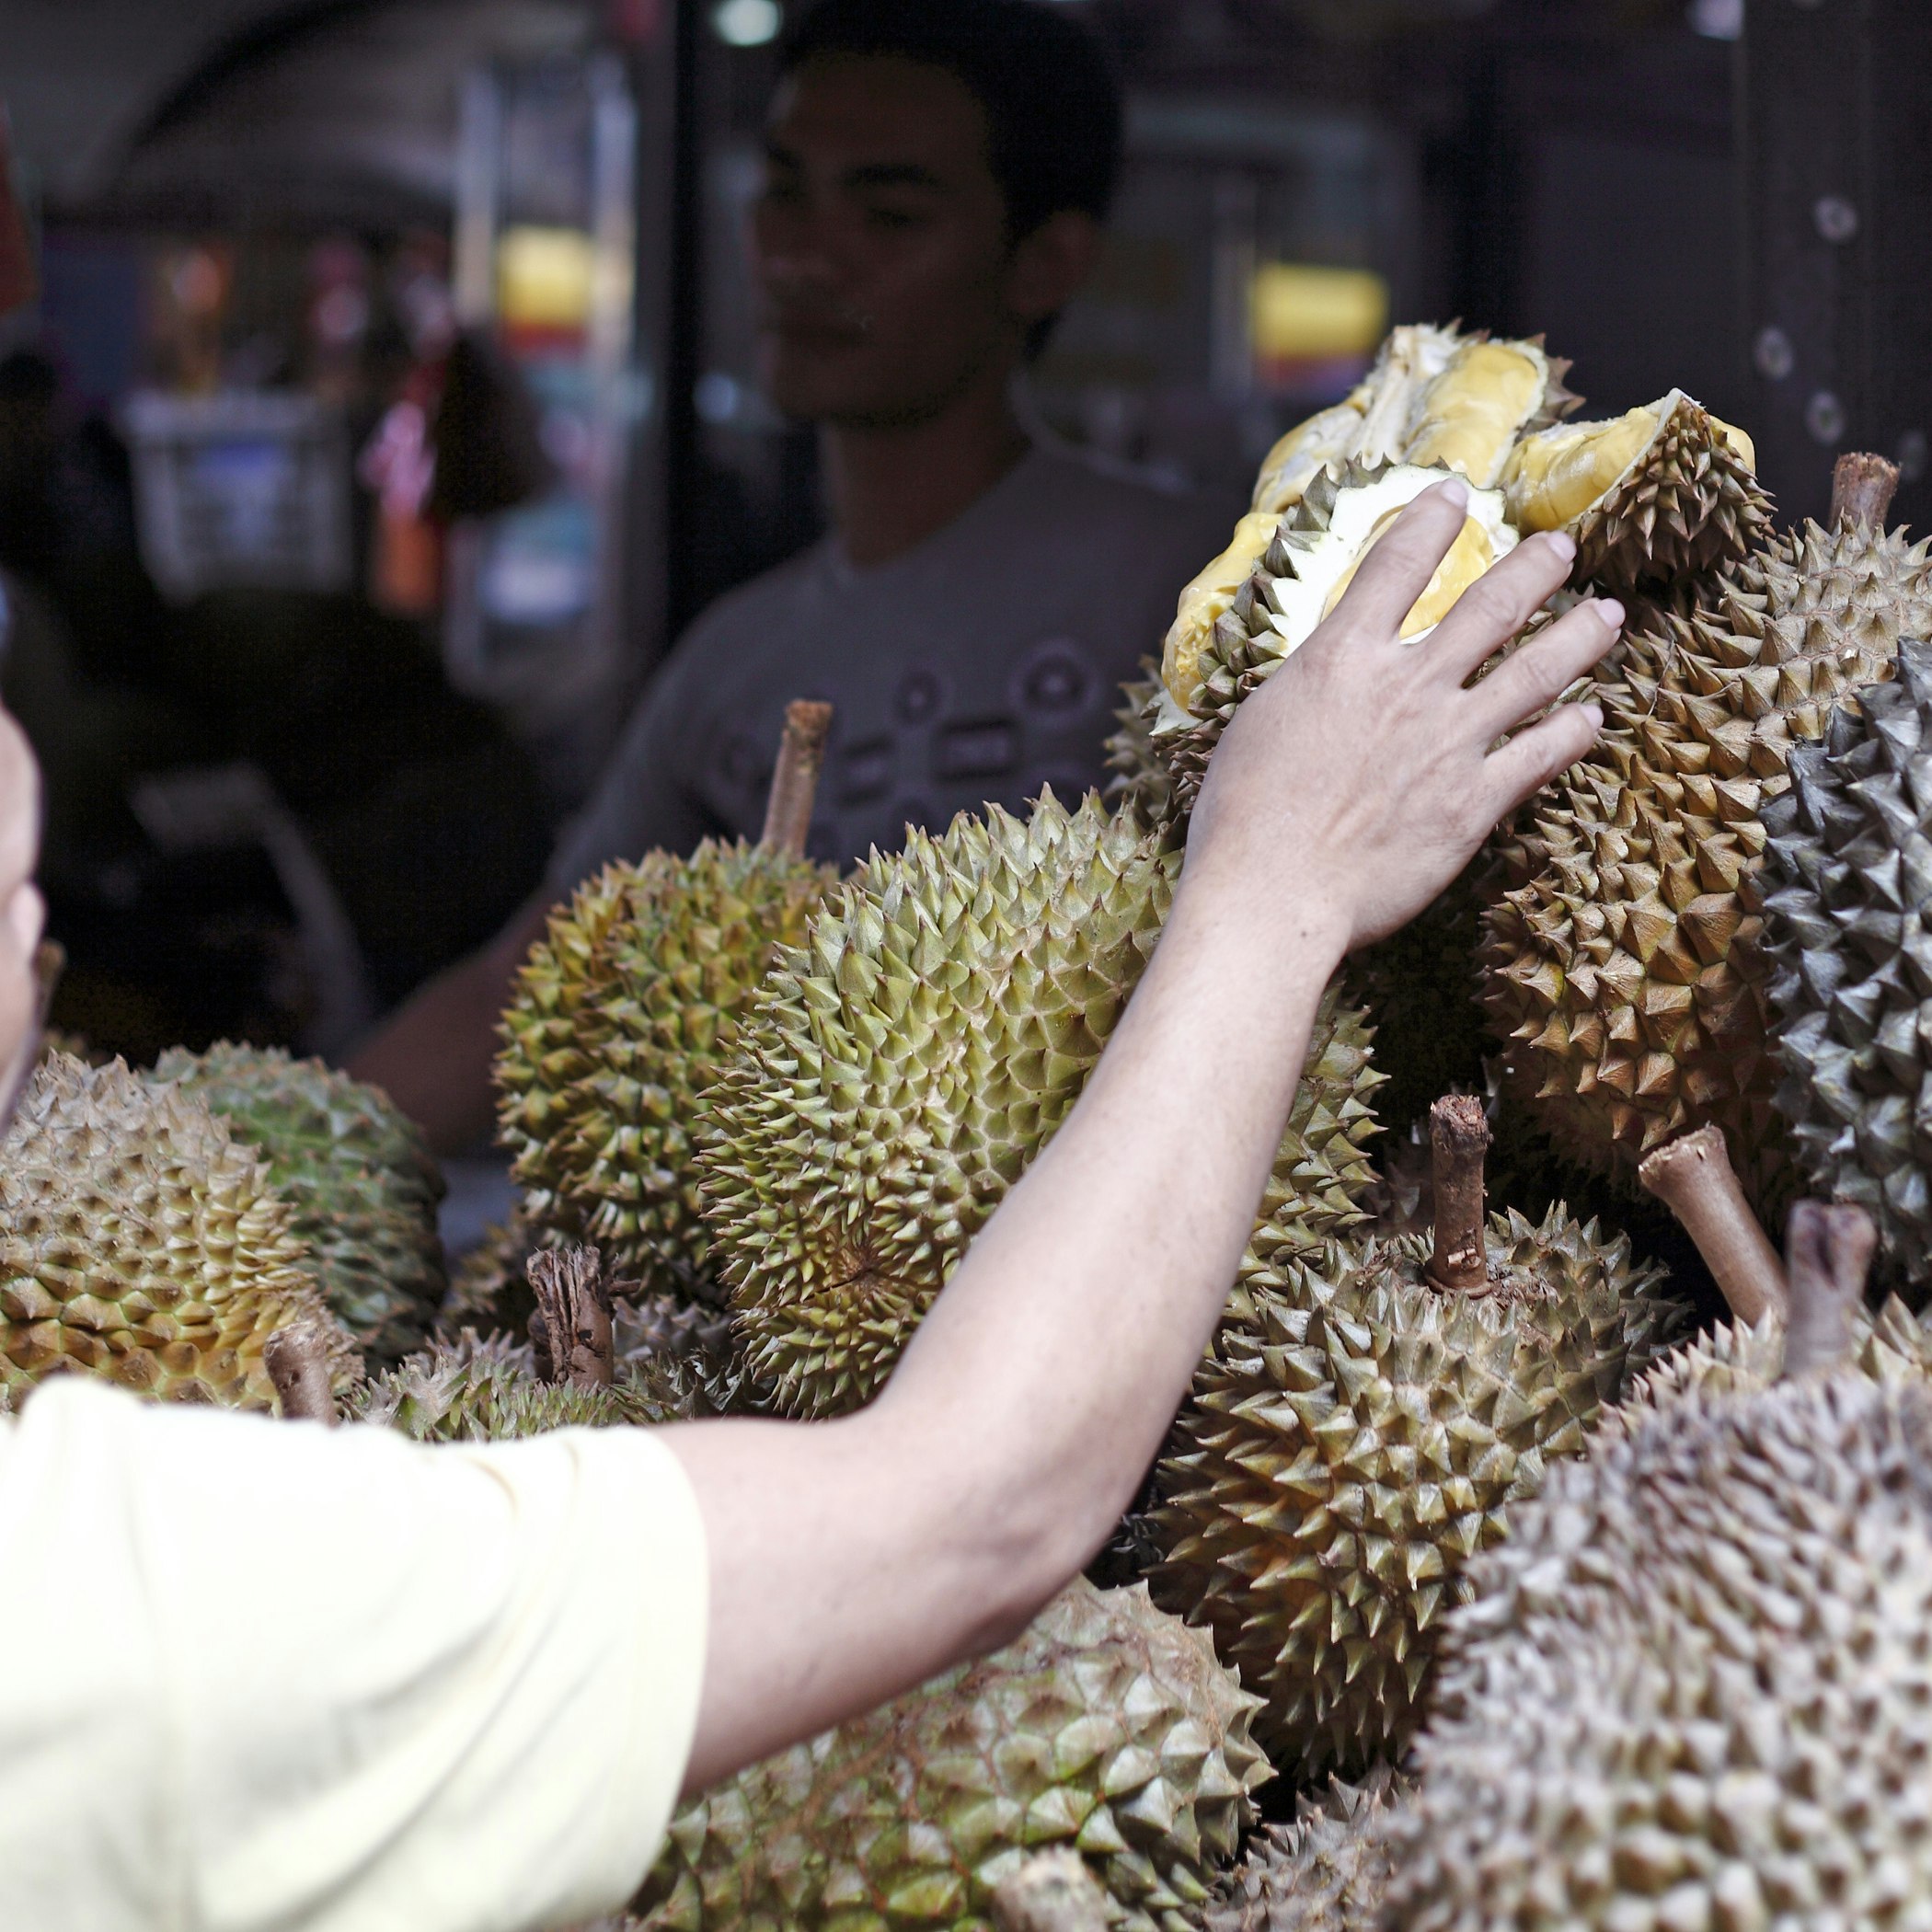 KUALA LUMPUR, MALAYSIA - SEPT 11: A shopper at a durian fruit stall on September 11, 2011 in Bazaar Baru Chow Kit, Kuala Lumpur, Malaysia. Durian is revered in Southeast Asia as the King of Fruits.; Shutterstock ID 84916264; Your name (First / Last): Lauren Gillmore; GL account no.: 56530; Netsuite department name: Online-Design; Full Product or Project name including edition: 65050/ Online Design /LaurenGillmore/POI